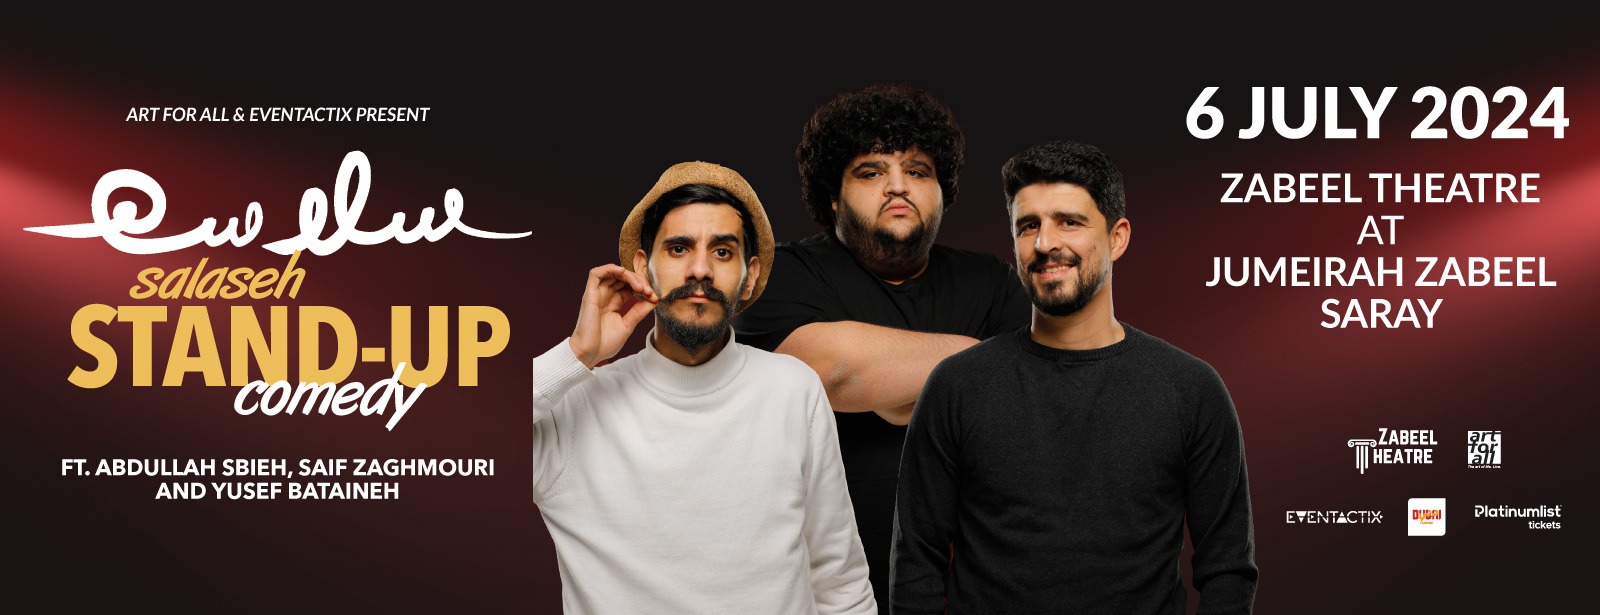 Salaseh Stand Up Arabic Comedy at Zabeel Theatre, Dubai - Coming Soon in UAE